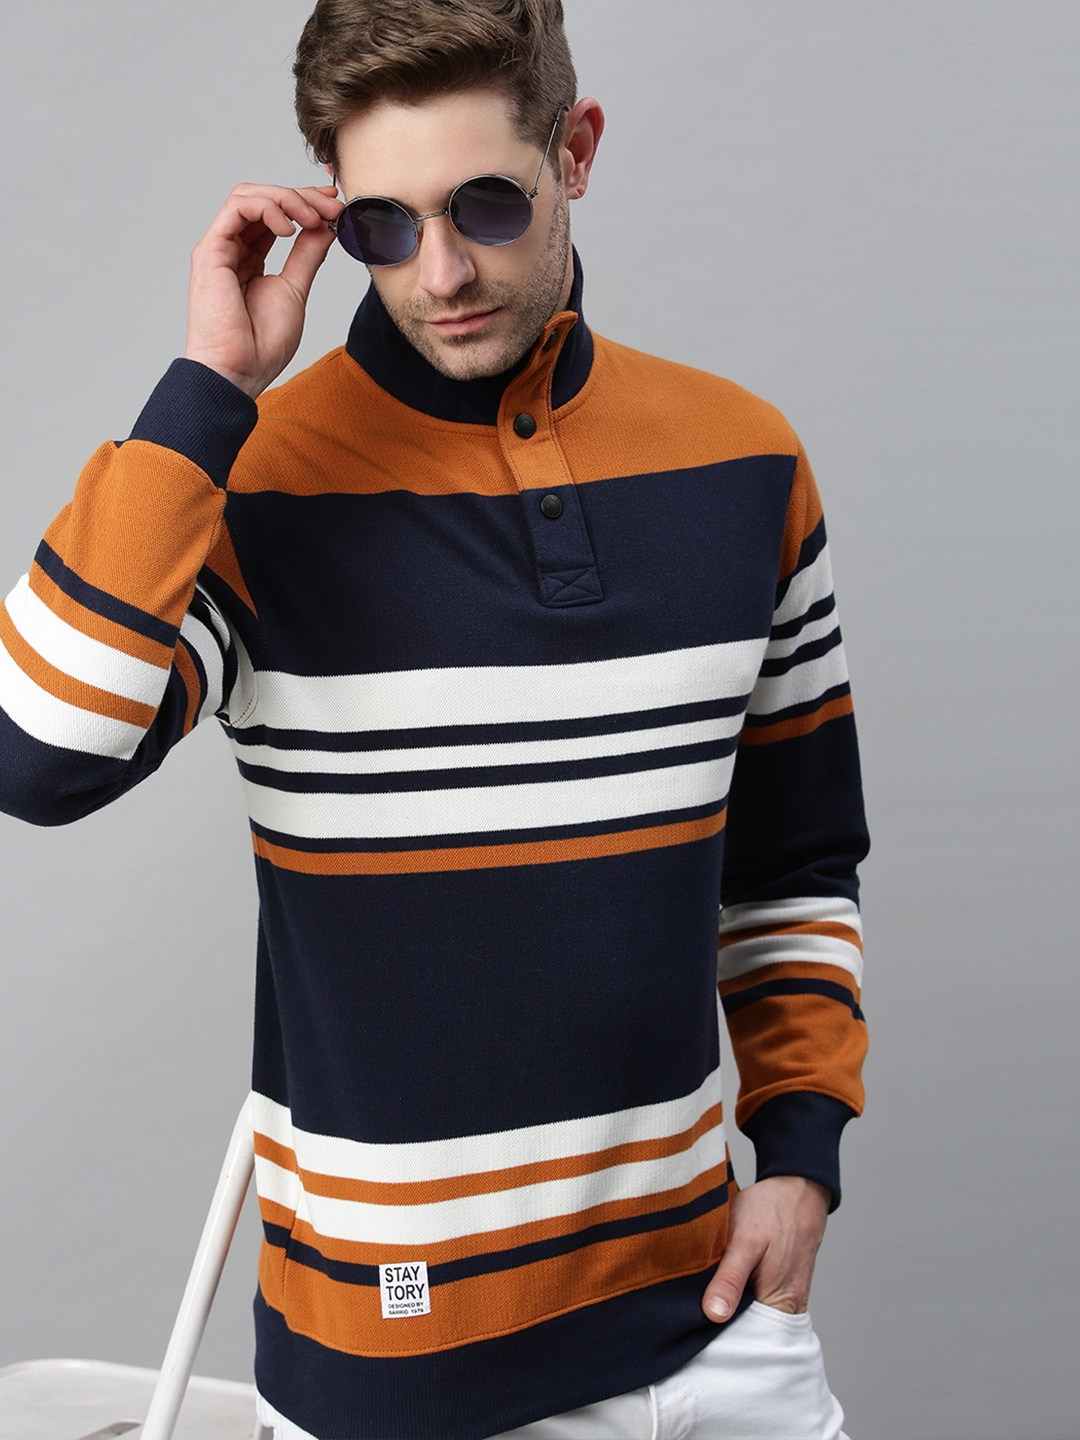 Showoff | Showoff Men's Cotton Casual Mustard and Navy Striped Sweatshirt